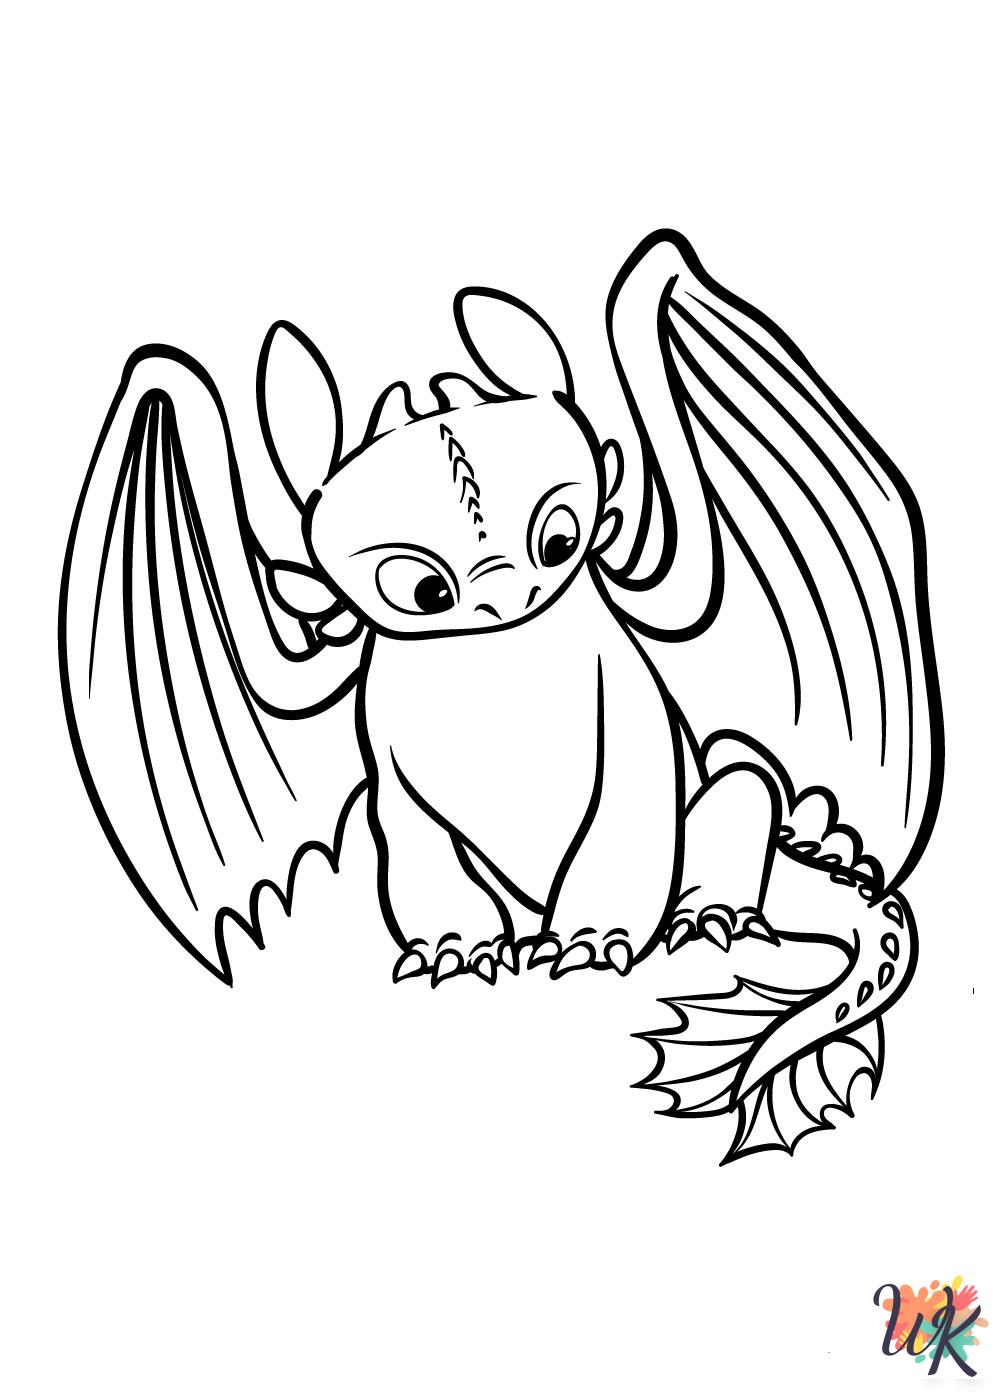 How To Train Your Dragon printable coloring pages